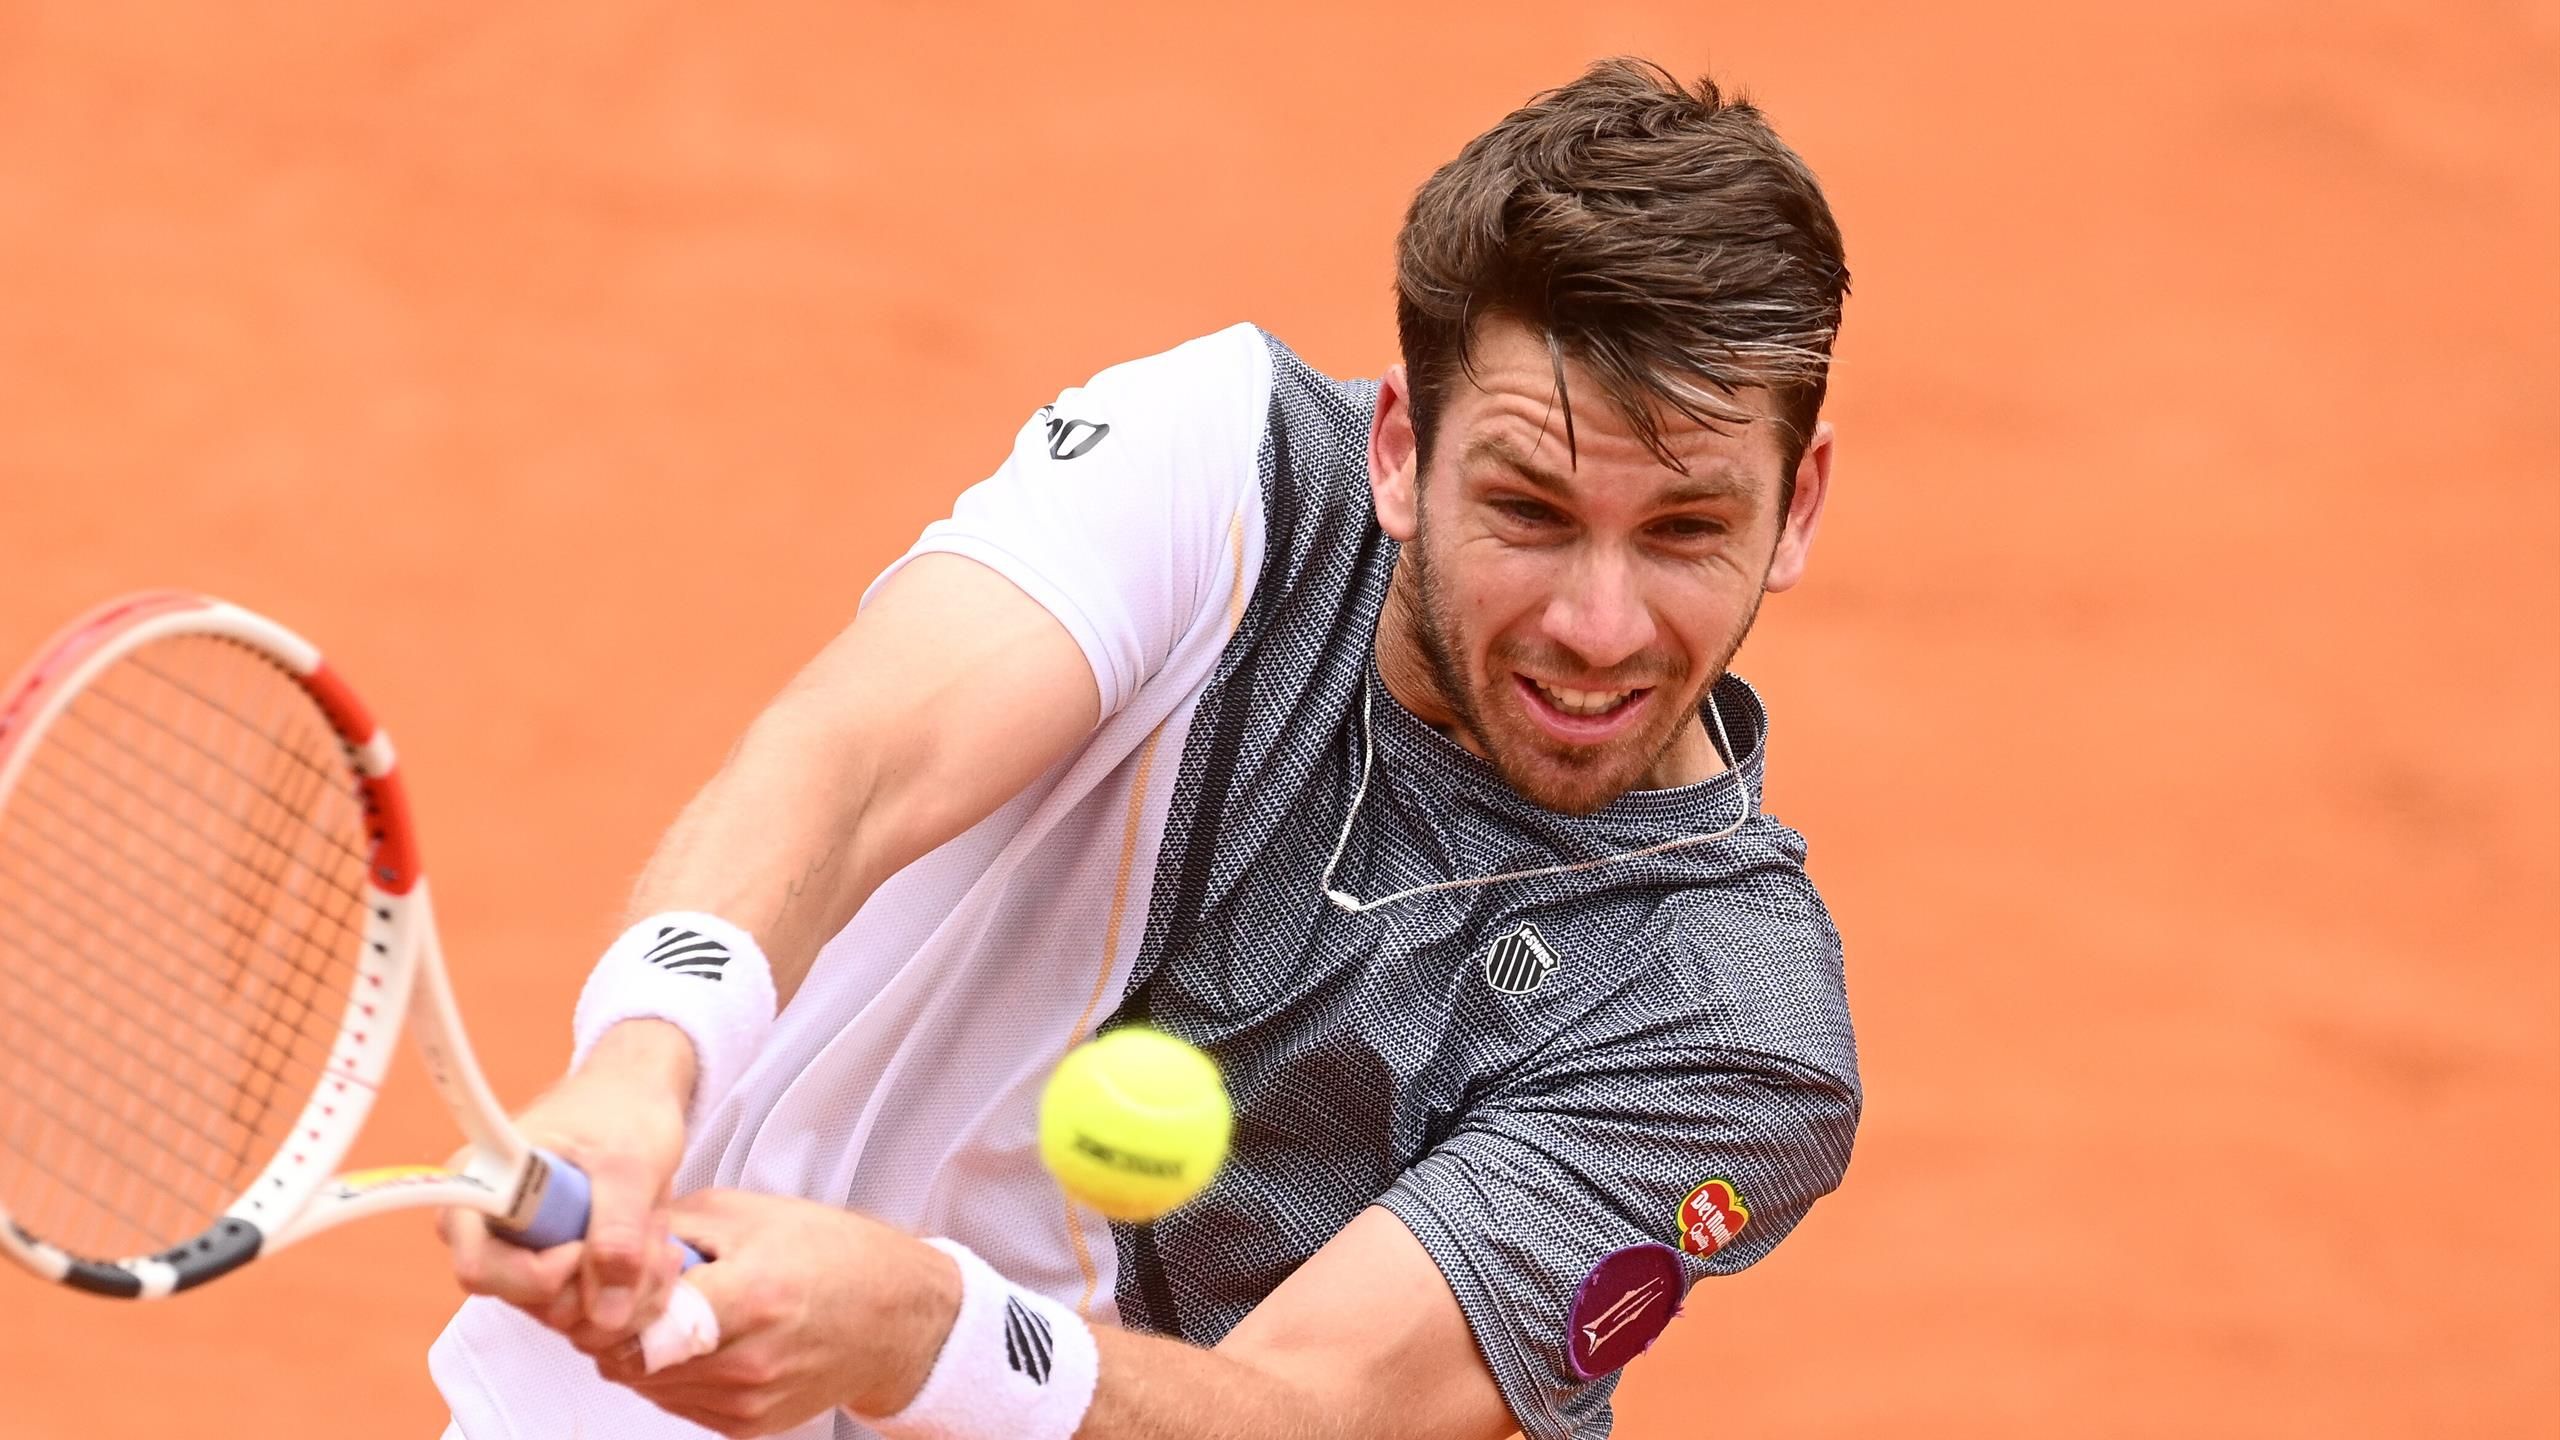 Cameron Norrie beats David Goffin to reach Lyon quarter-finals, Harriet Dart loses in French Open qualifying